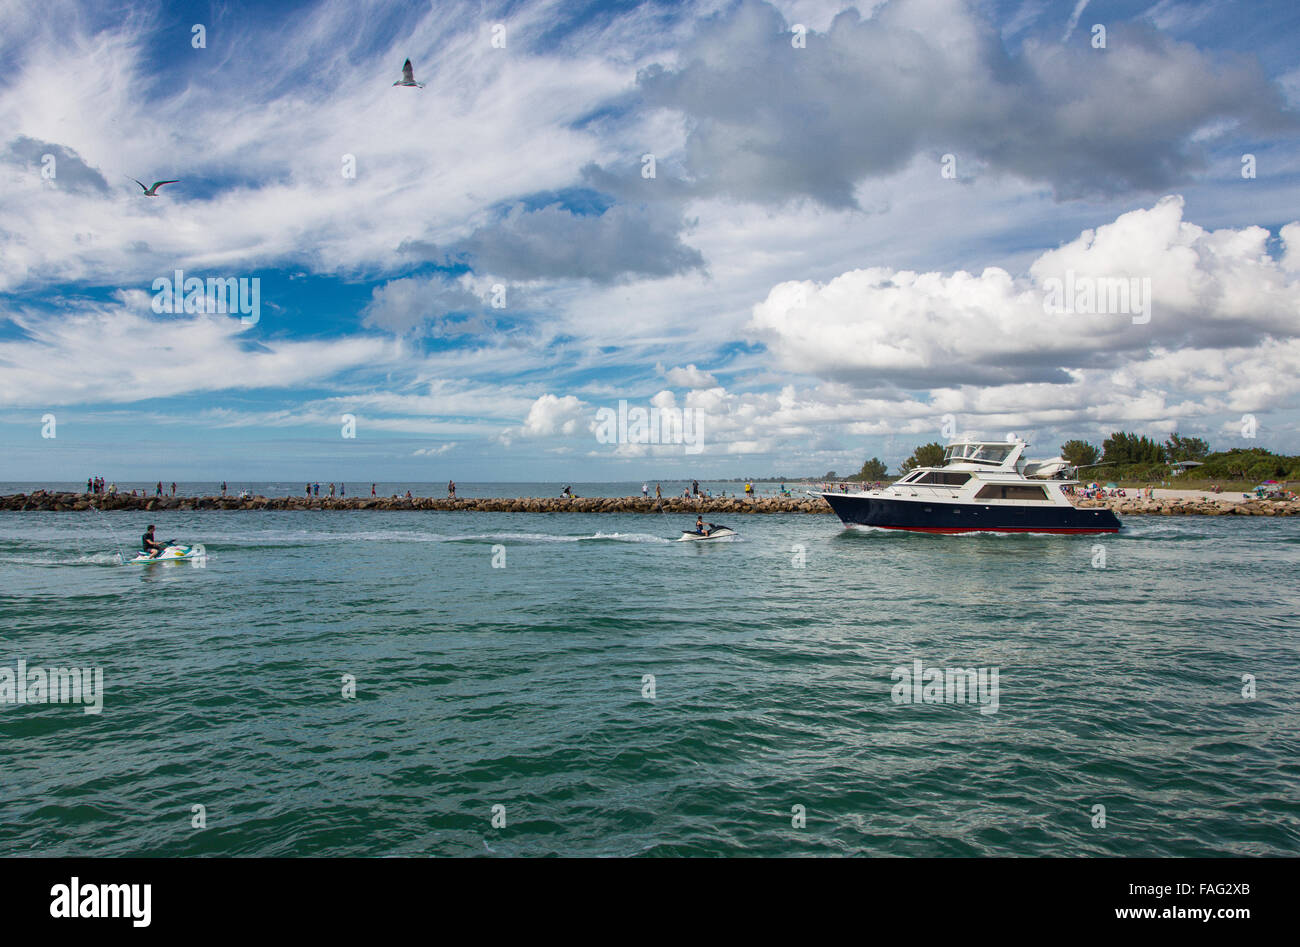 North Jetty and channel from Gulf Intercoastal Waterway to Gulf of Mexico in Venioe Florida Stock Photo